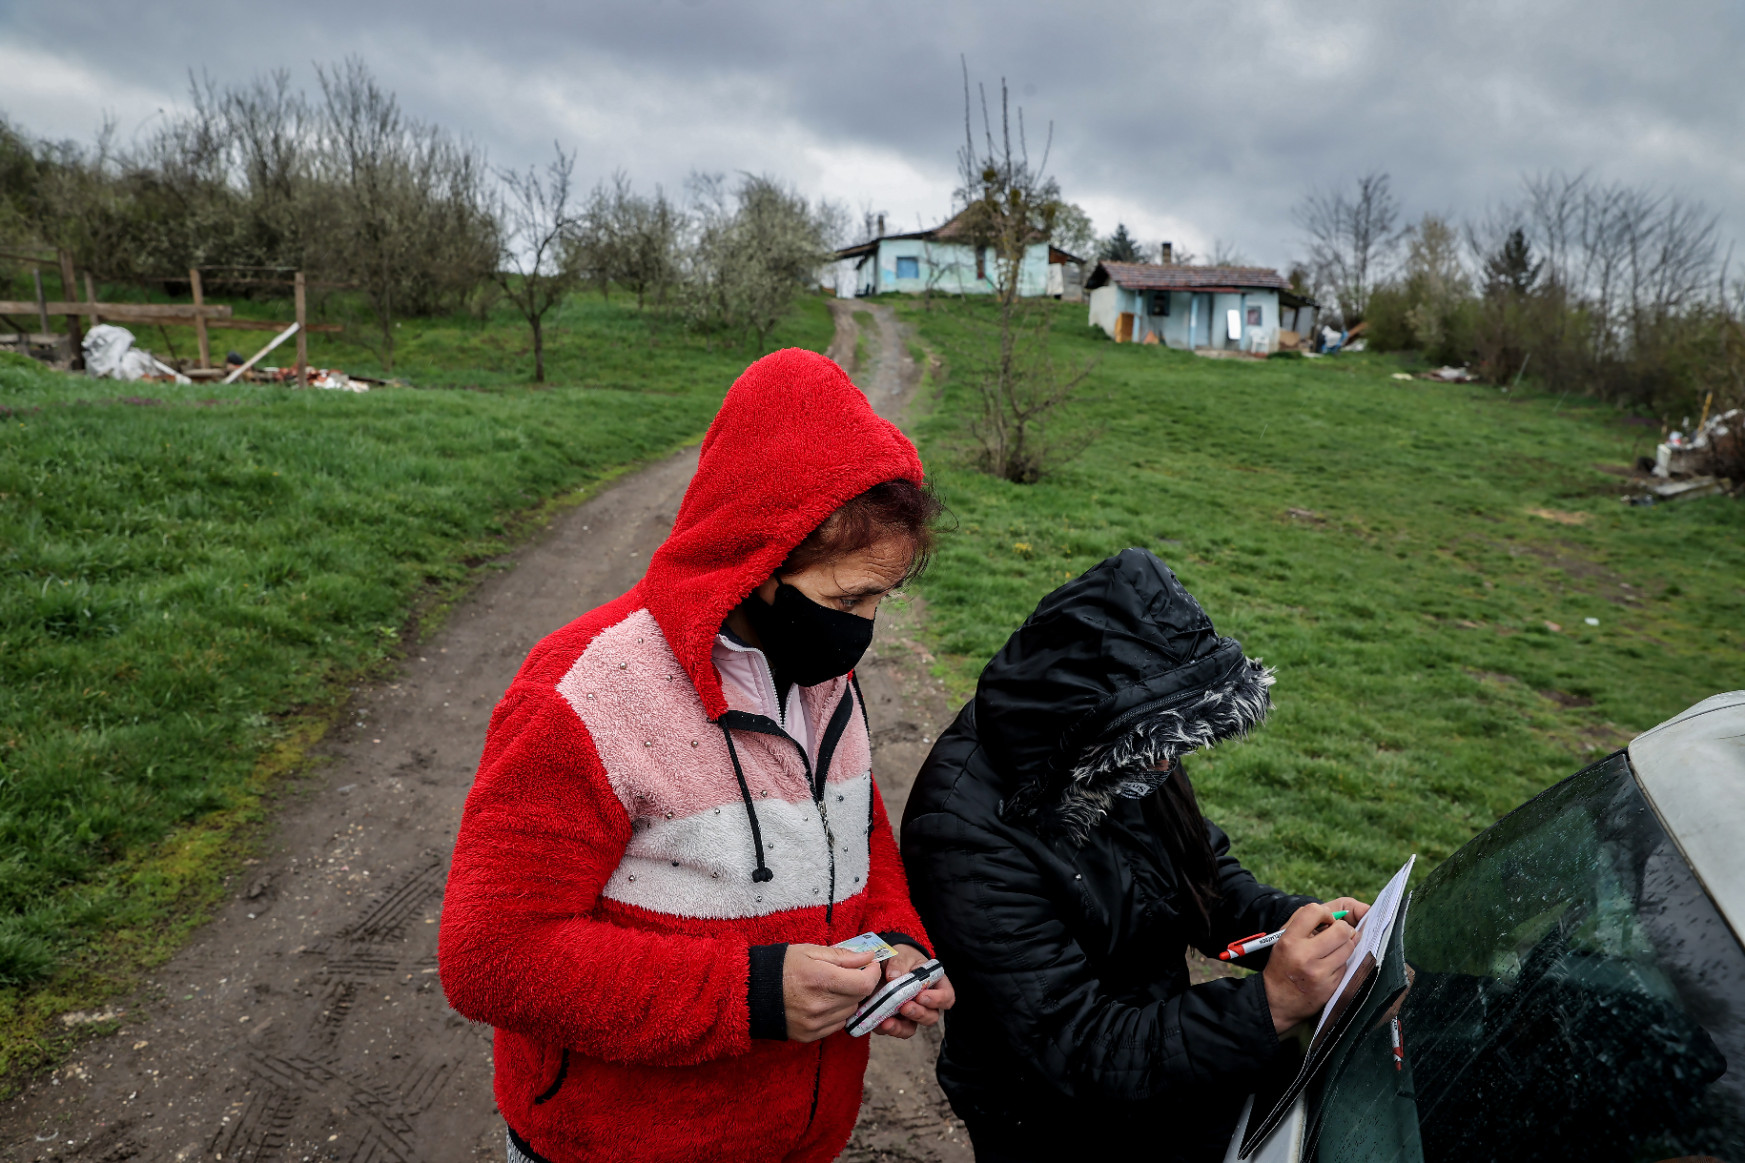 'From what I've heard, the Russkie stuff is stronger' – The vaccination campaign in Hungary's segregated communities